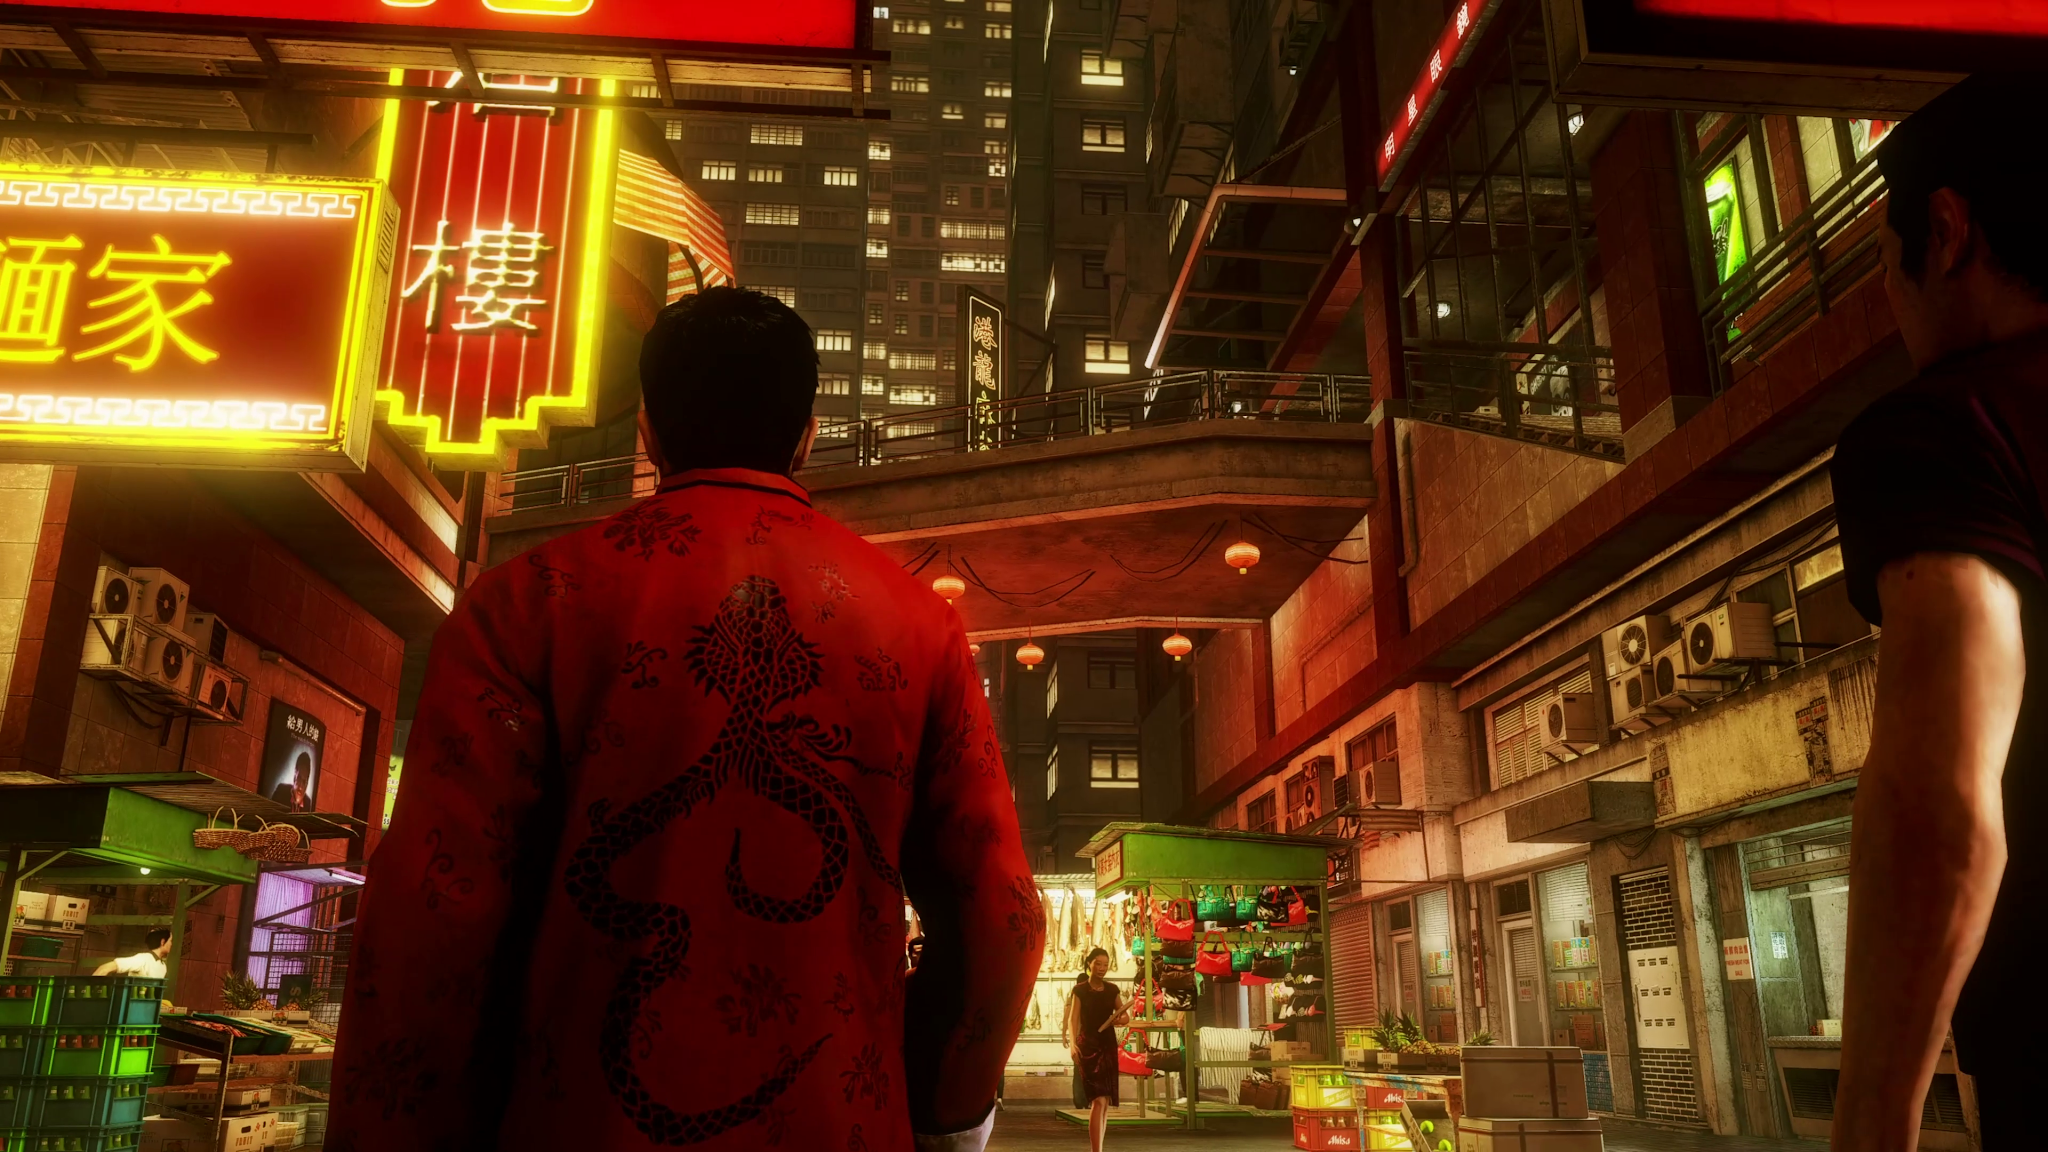 img2 image - Sleeping dogs : New look pack mod for Sleeping Dogs - Mod DB